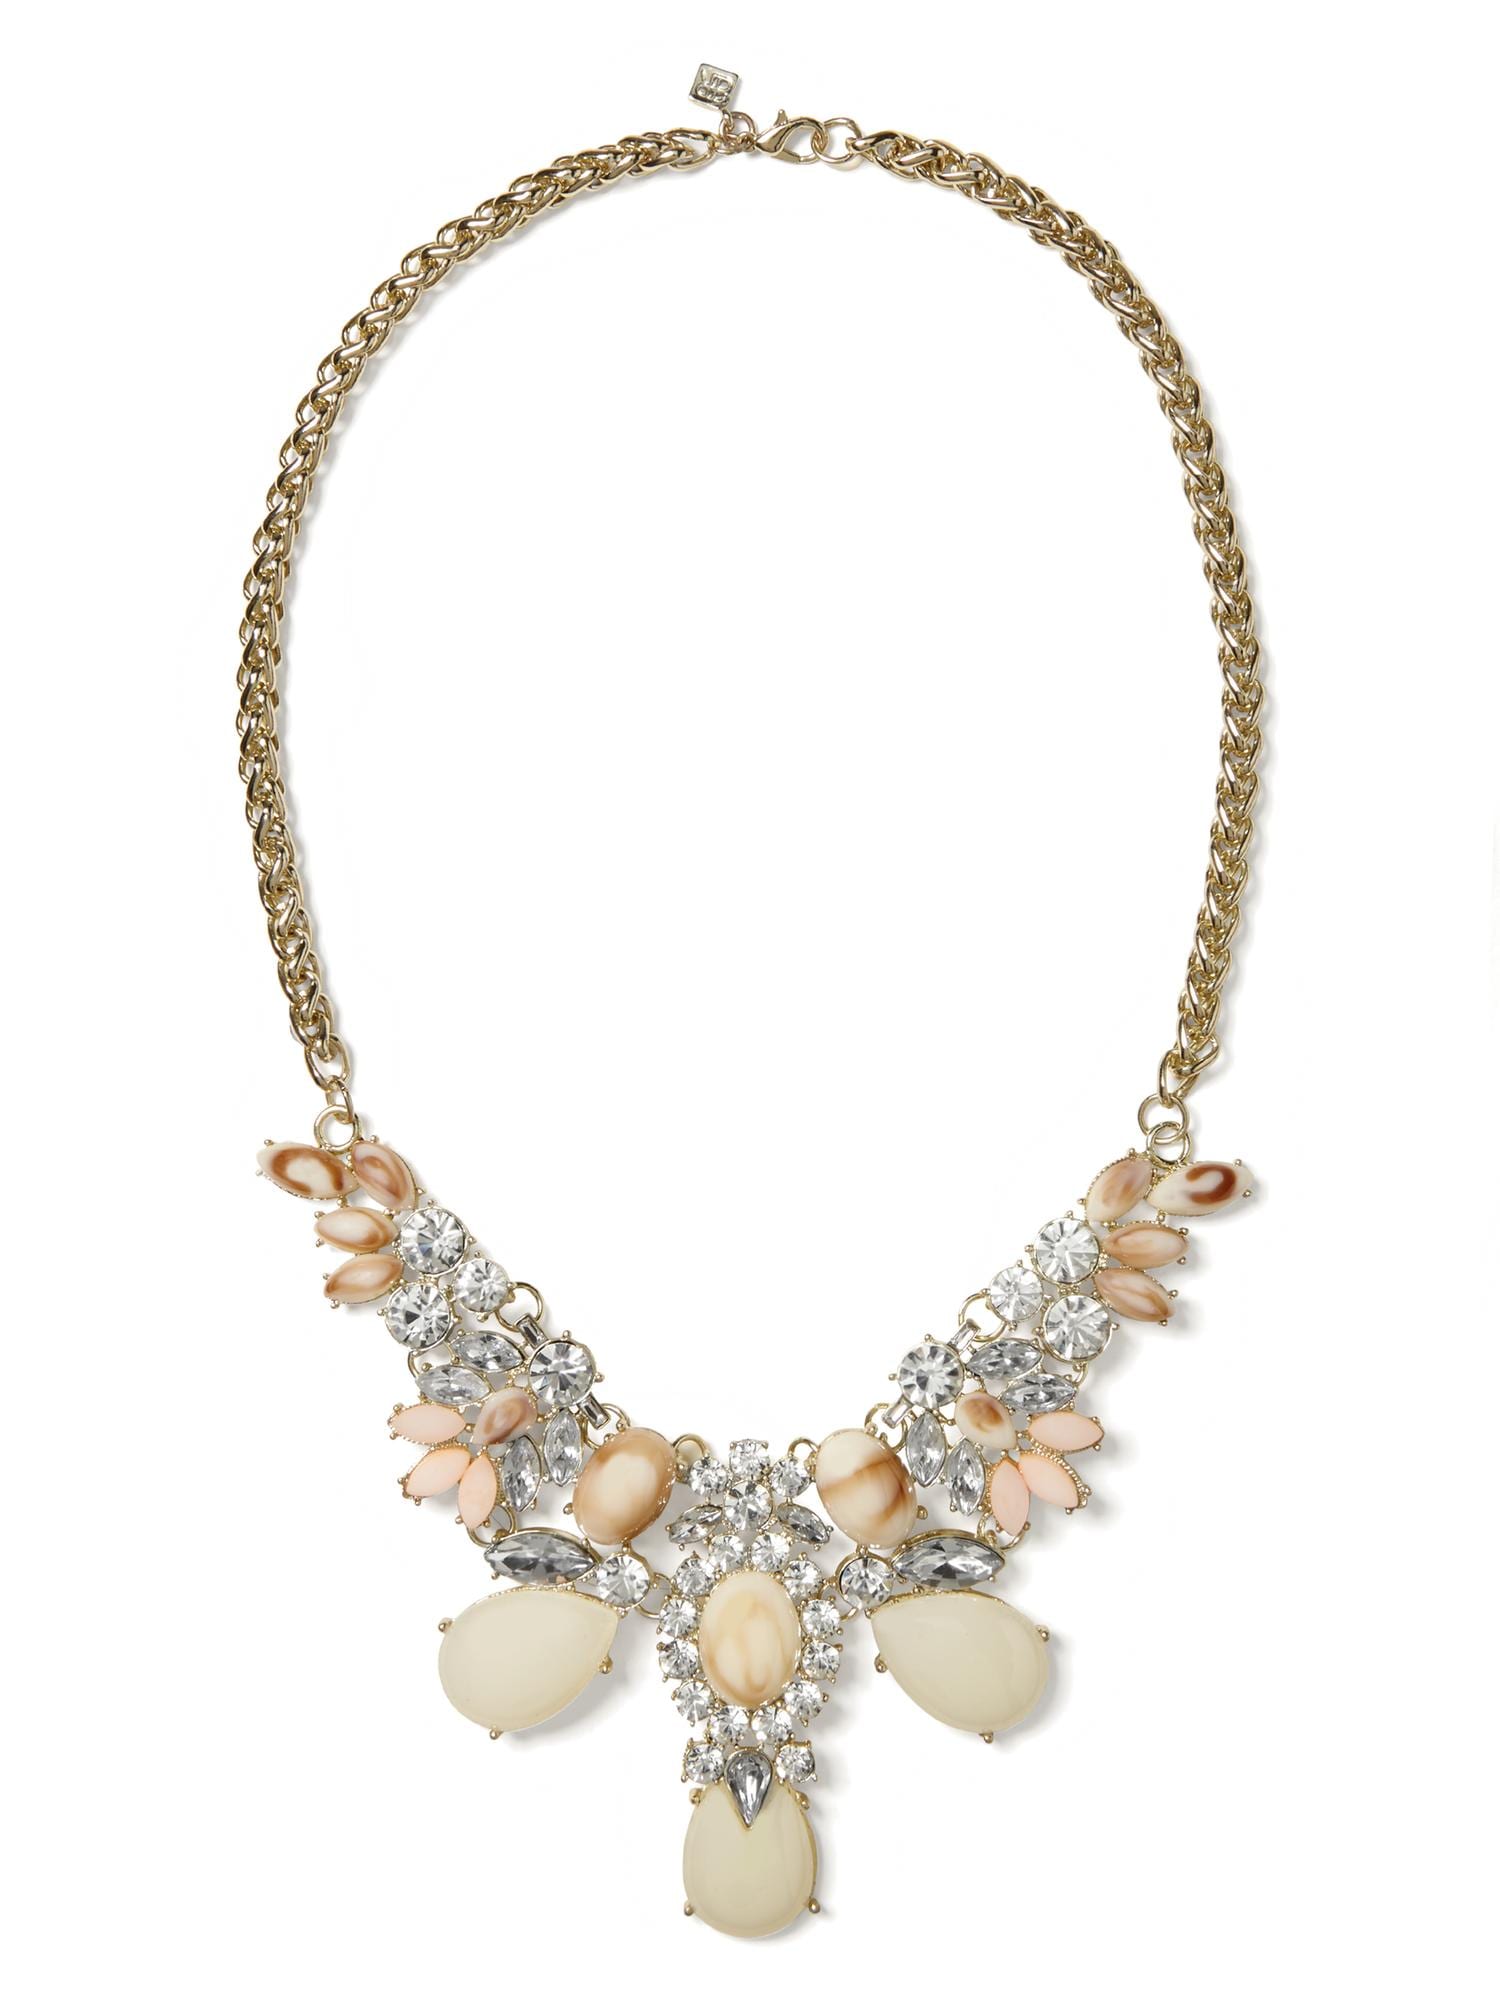 Peaches and Cream Statement Necklace